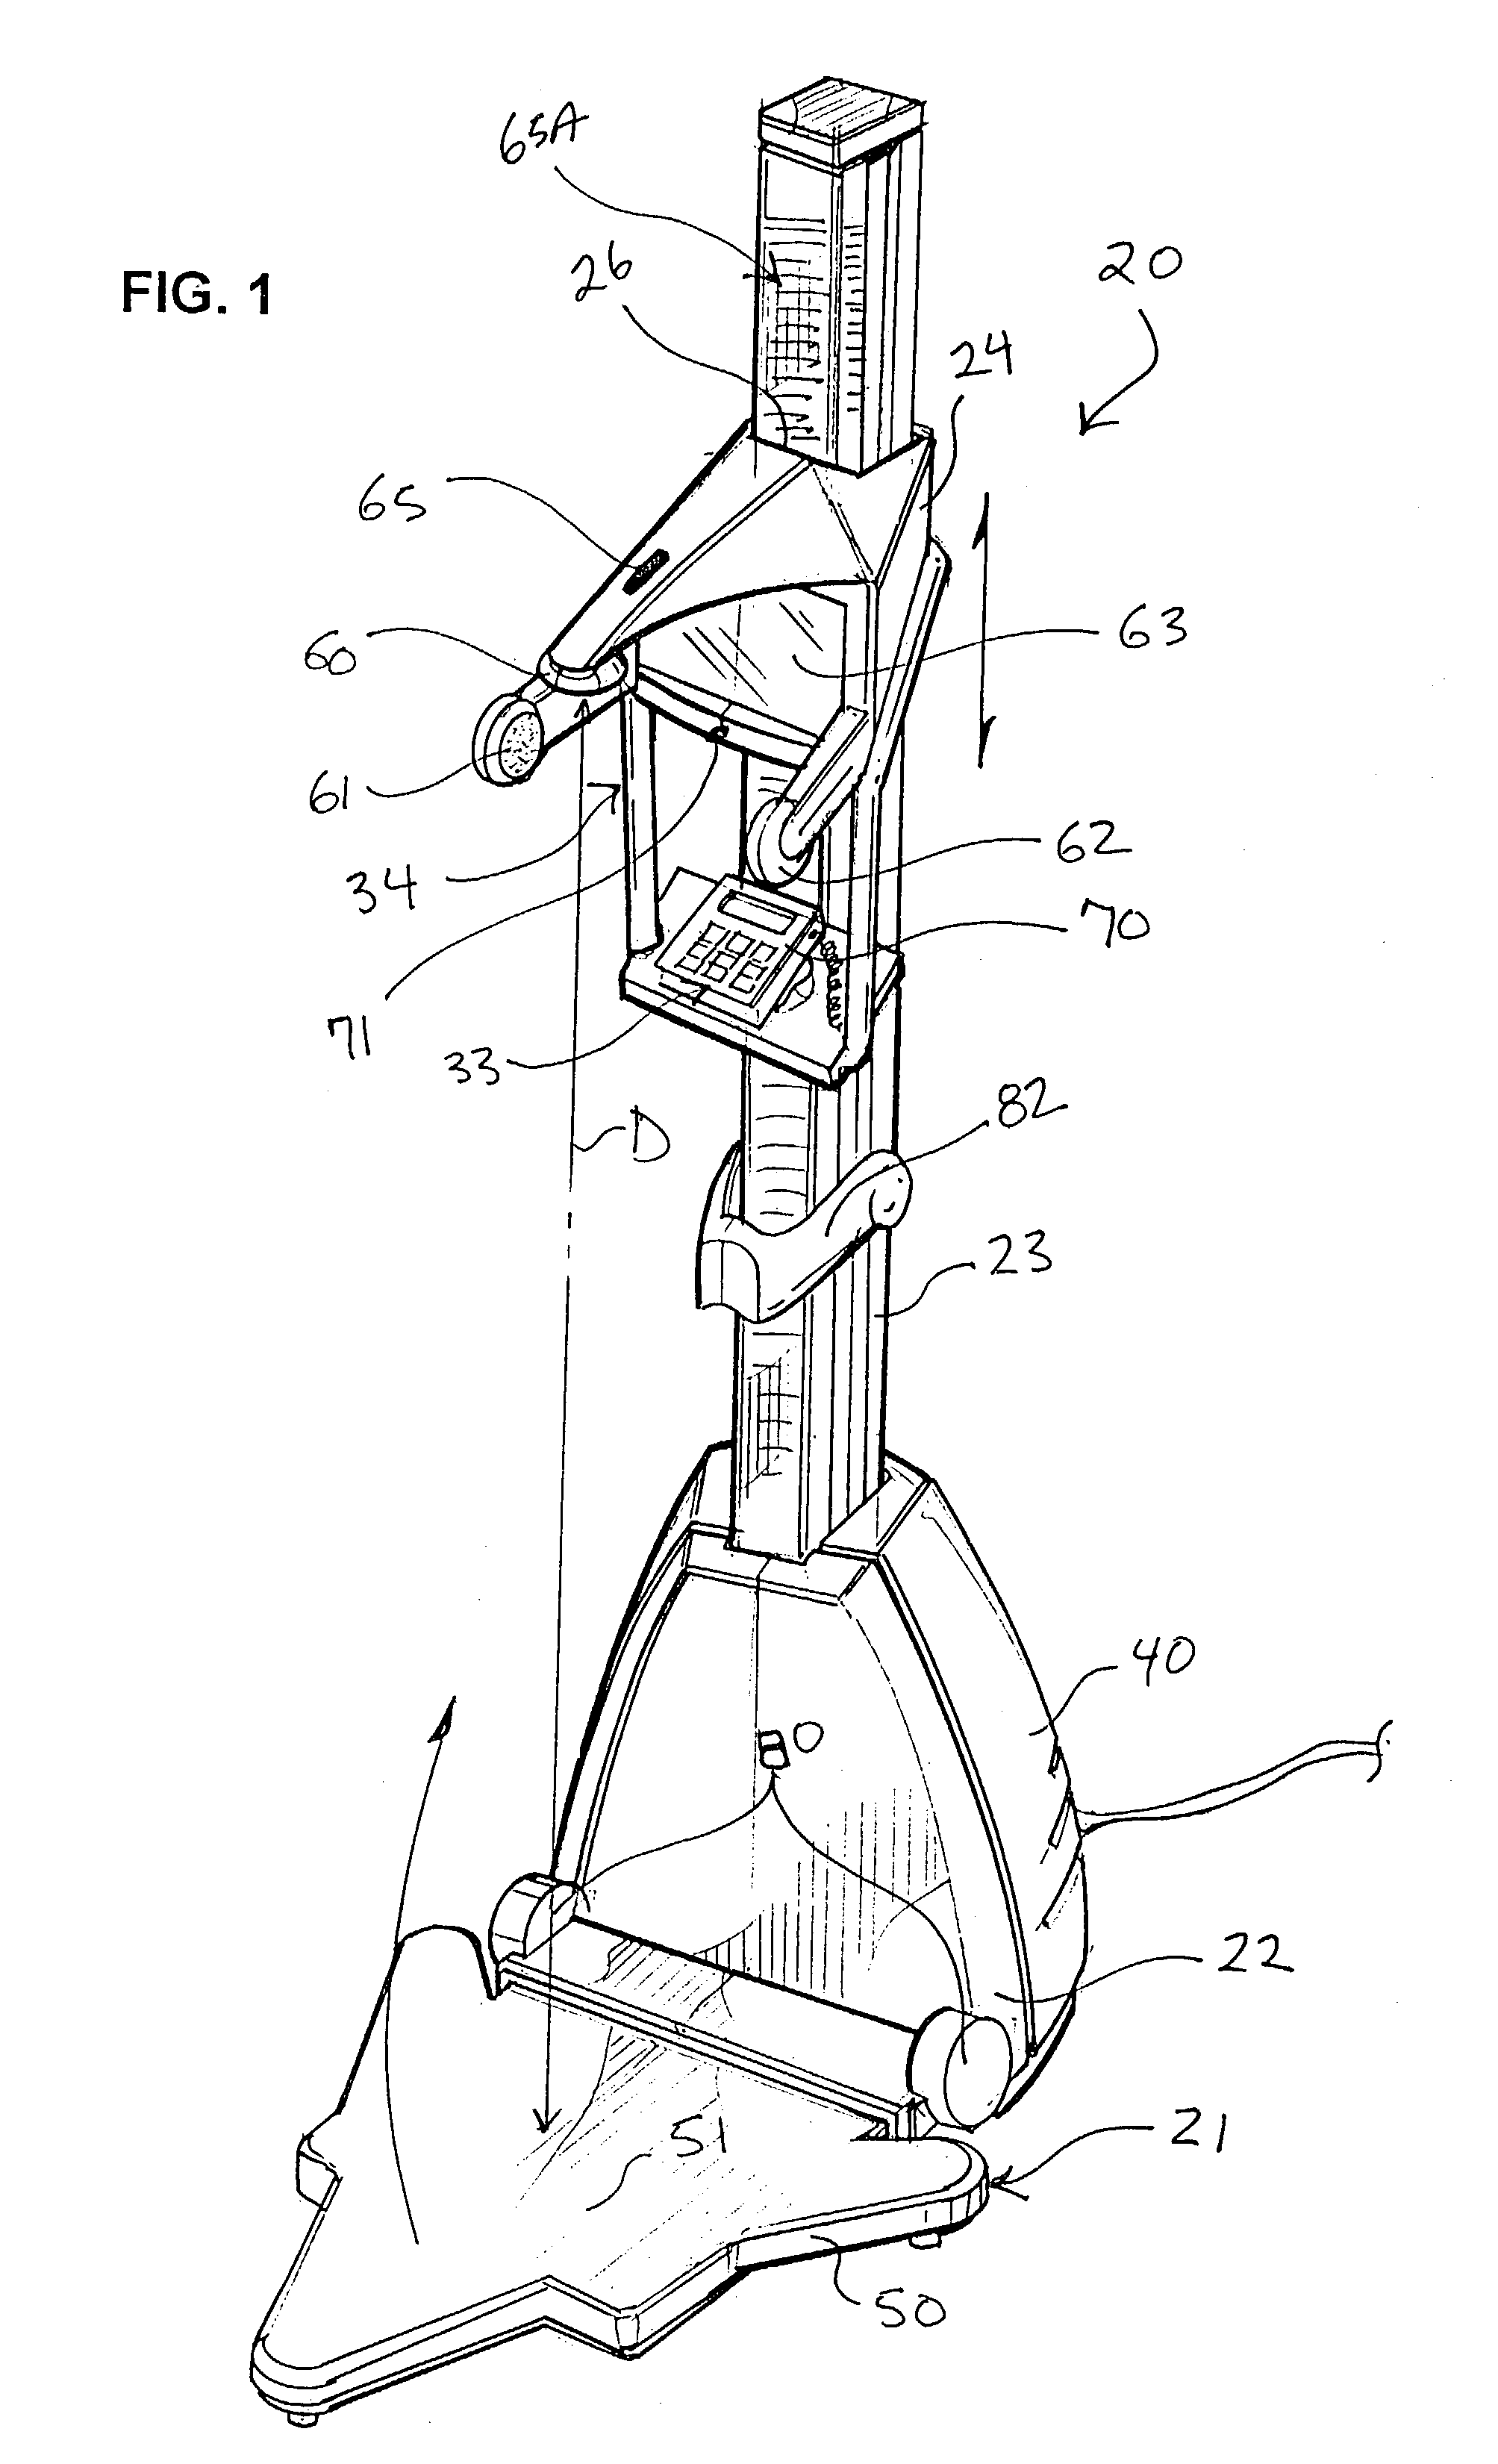 Patient data collection system and methods